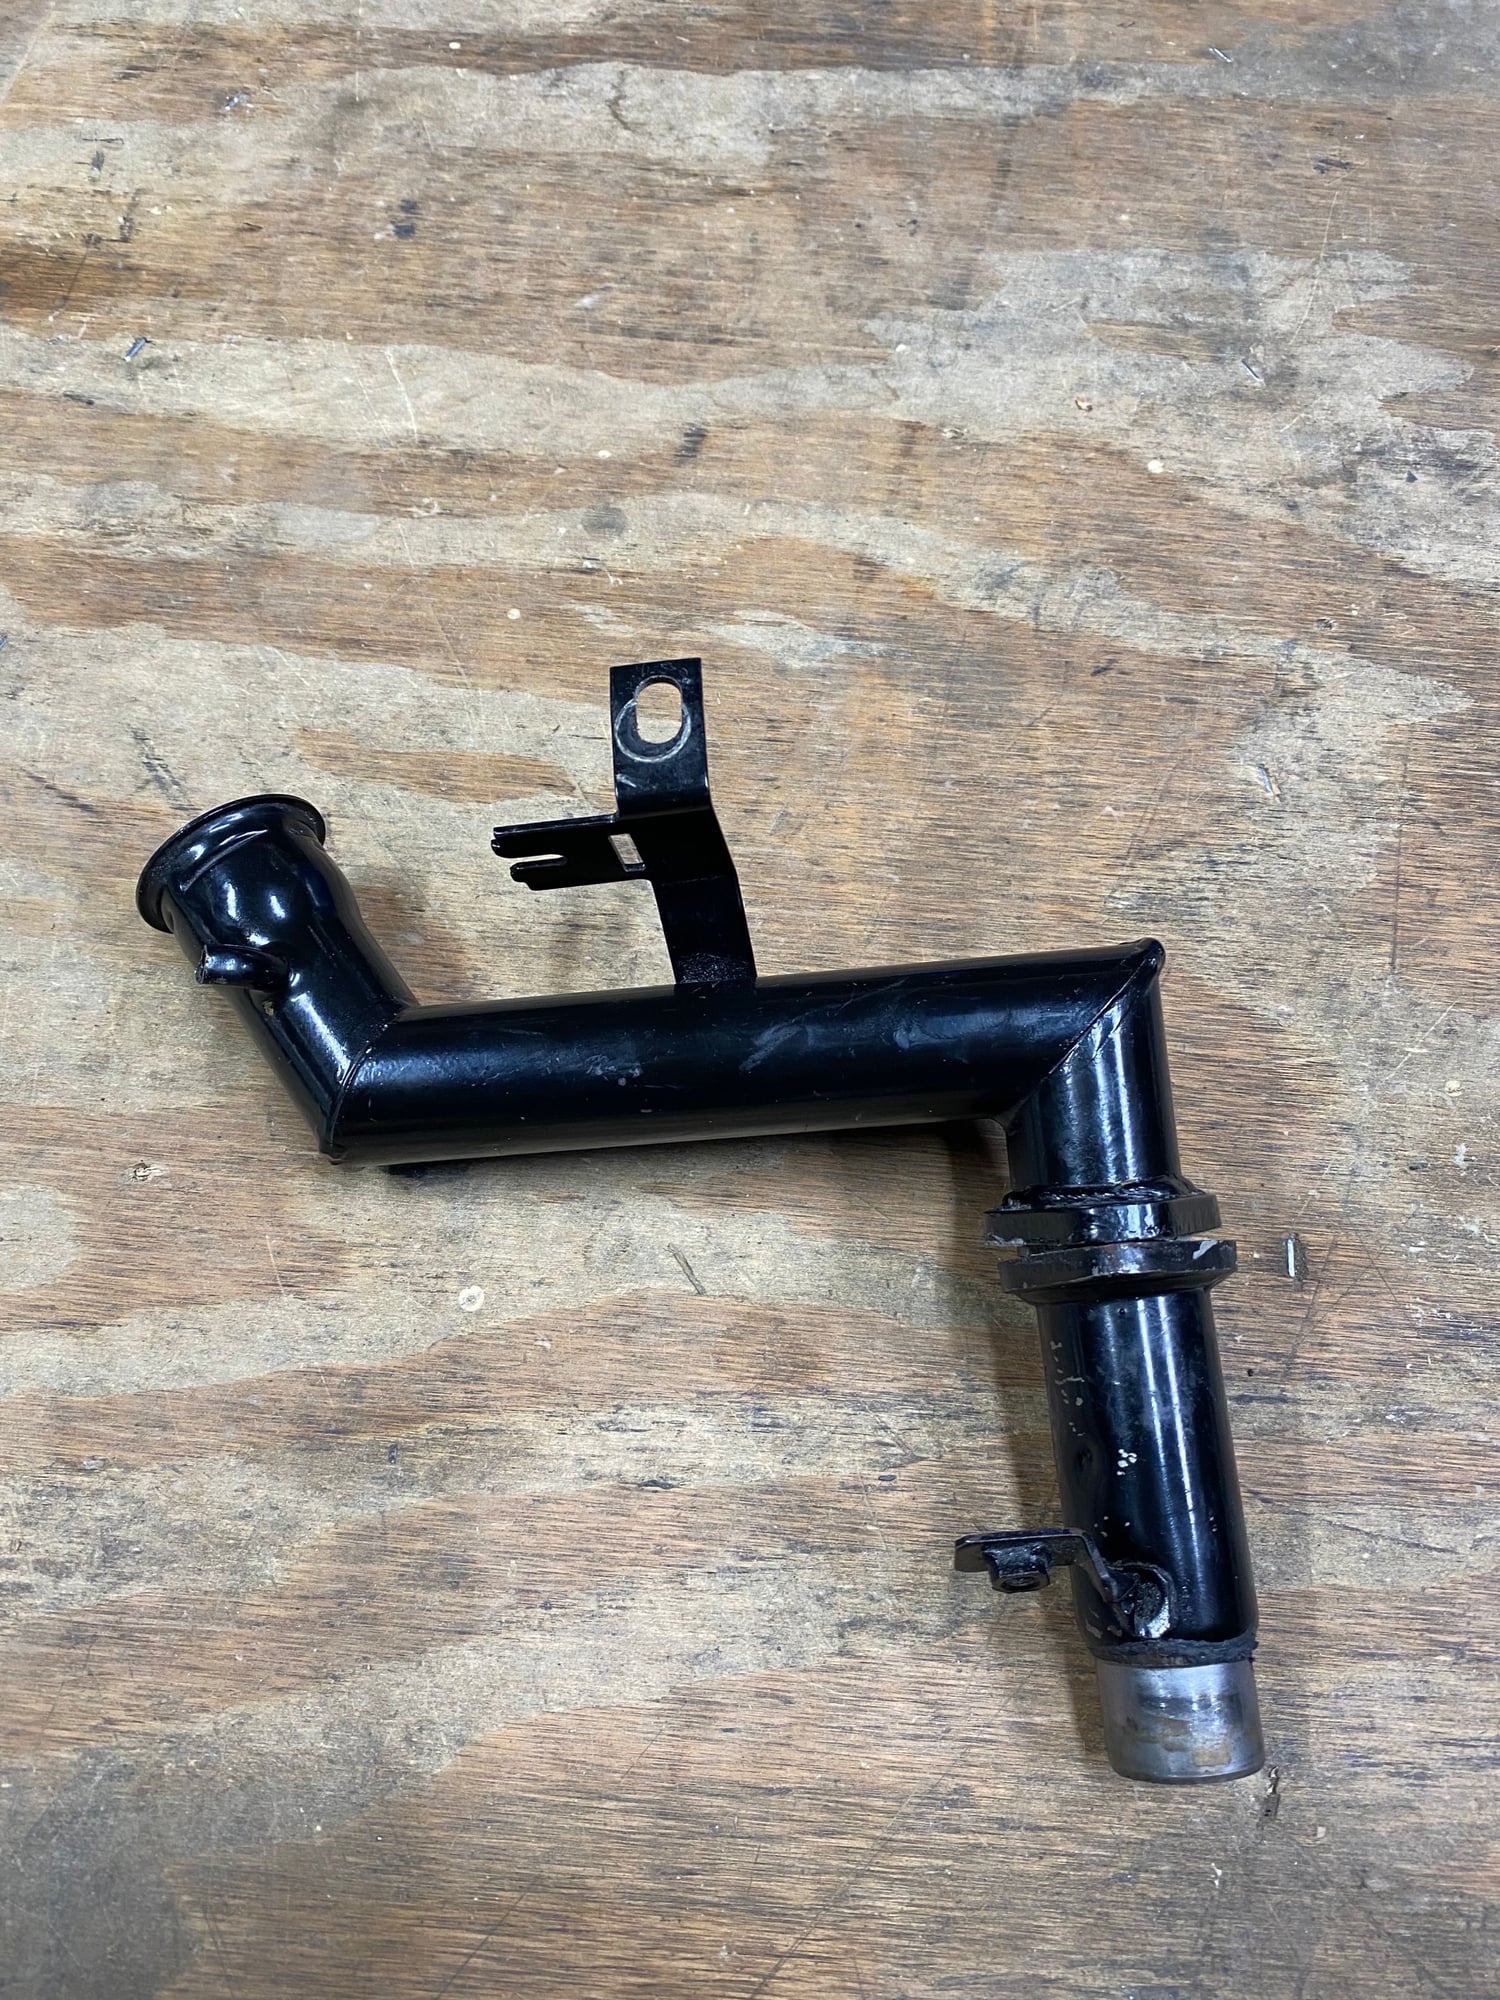 Miscellaneous - Want to buy RX-7 FC Turbo oil Filler and base as pictured - Used - Prince Frederick, MD 20678, United States